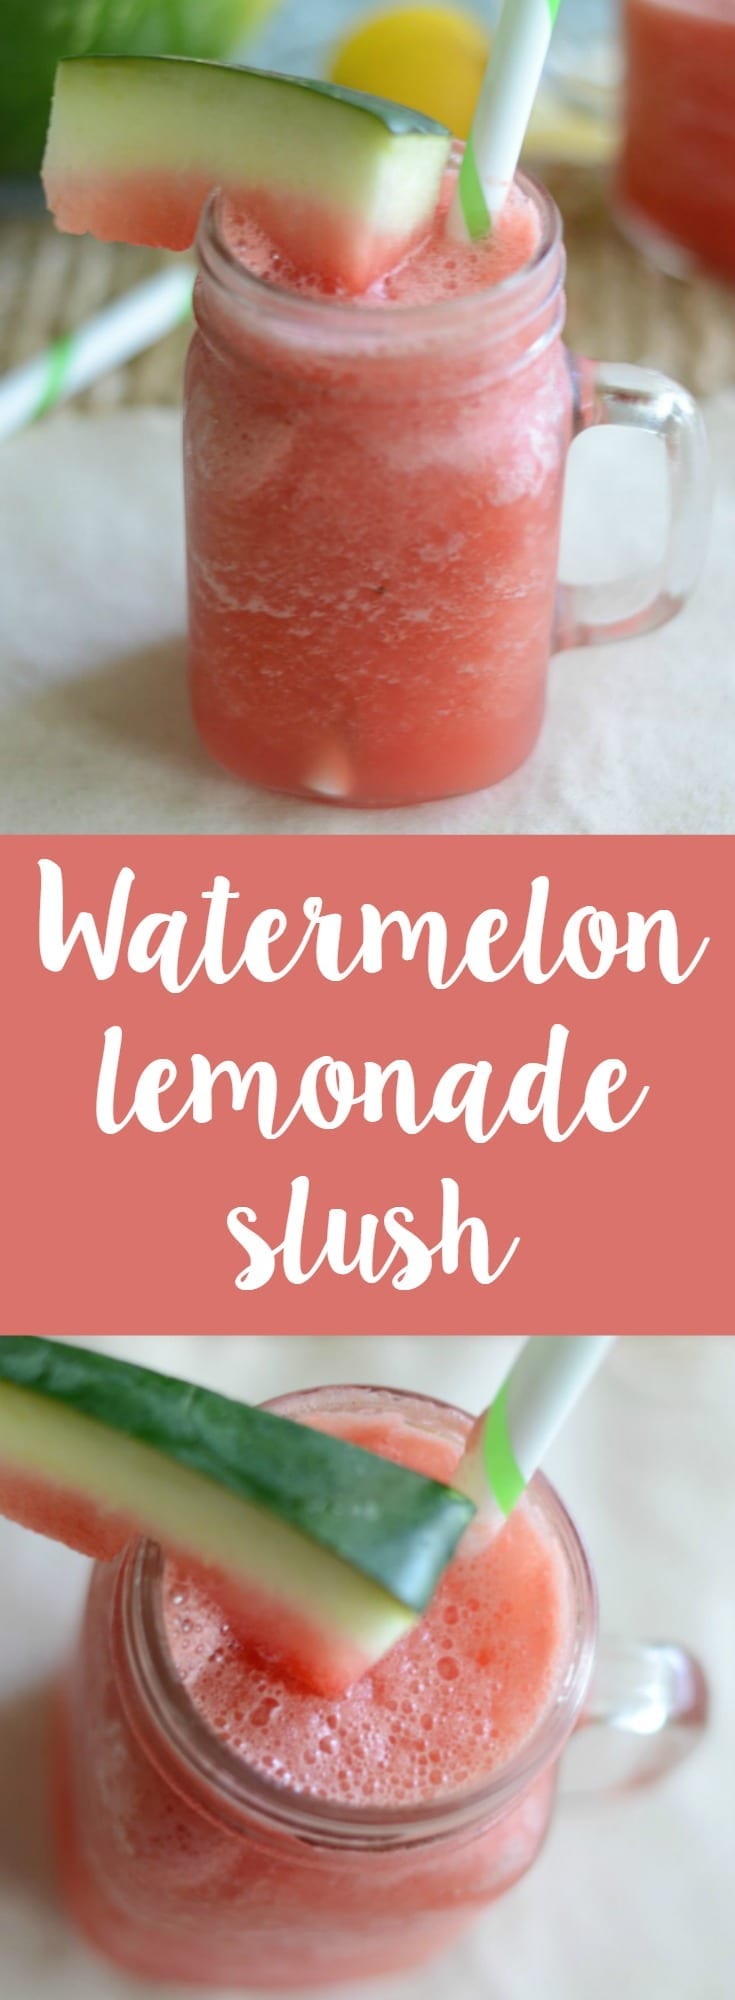 Make this easy watermelon lemonade slushie at home!  Only 3 ingredients and oh so refreshing!